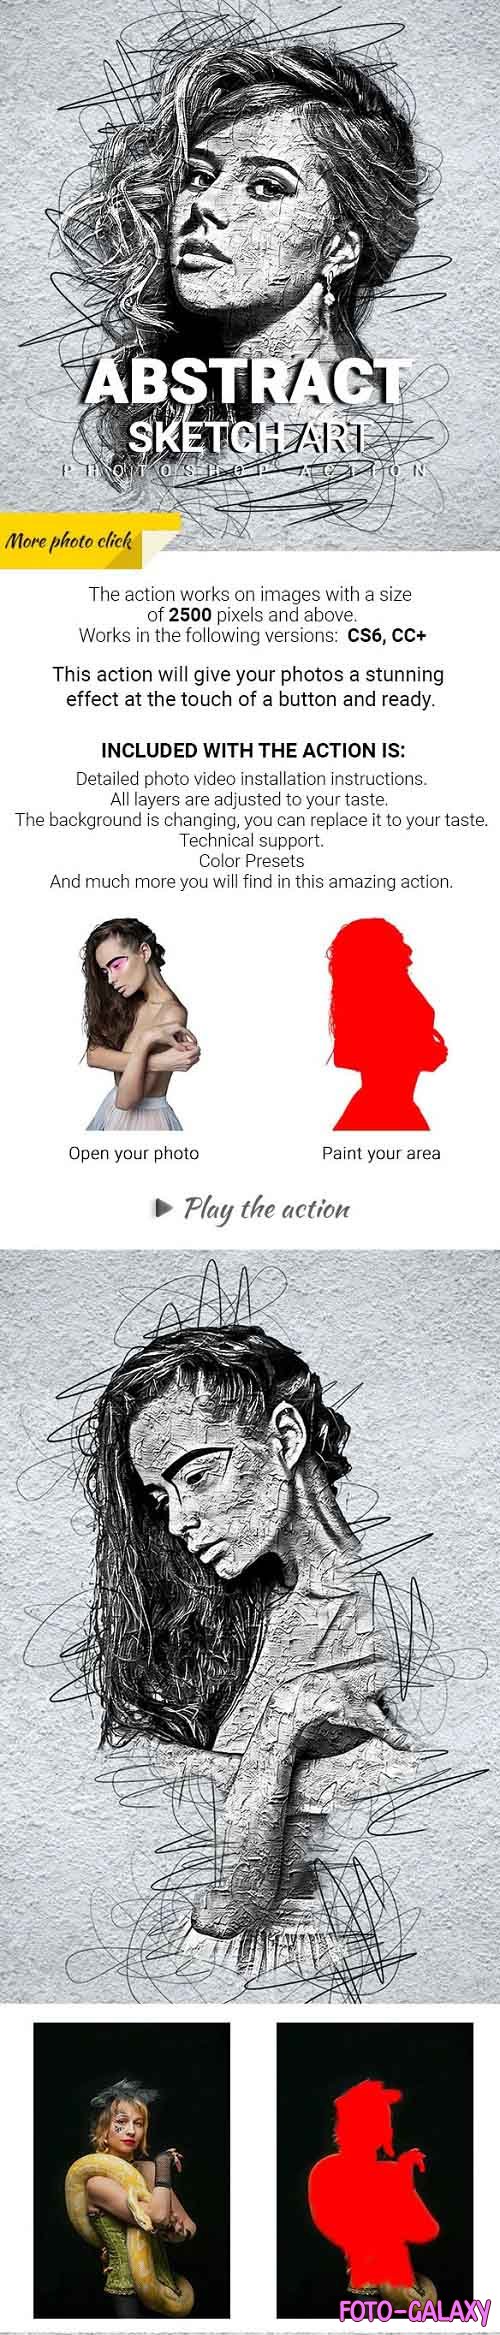 GraphicRiver - Abstract Sketch Art Photoshop Action 29913460